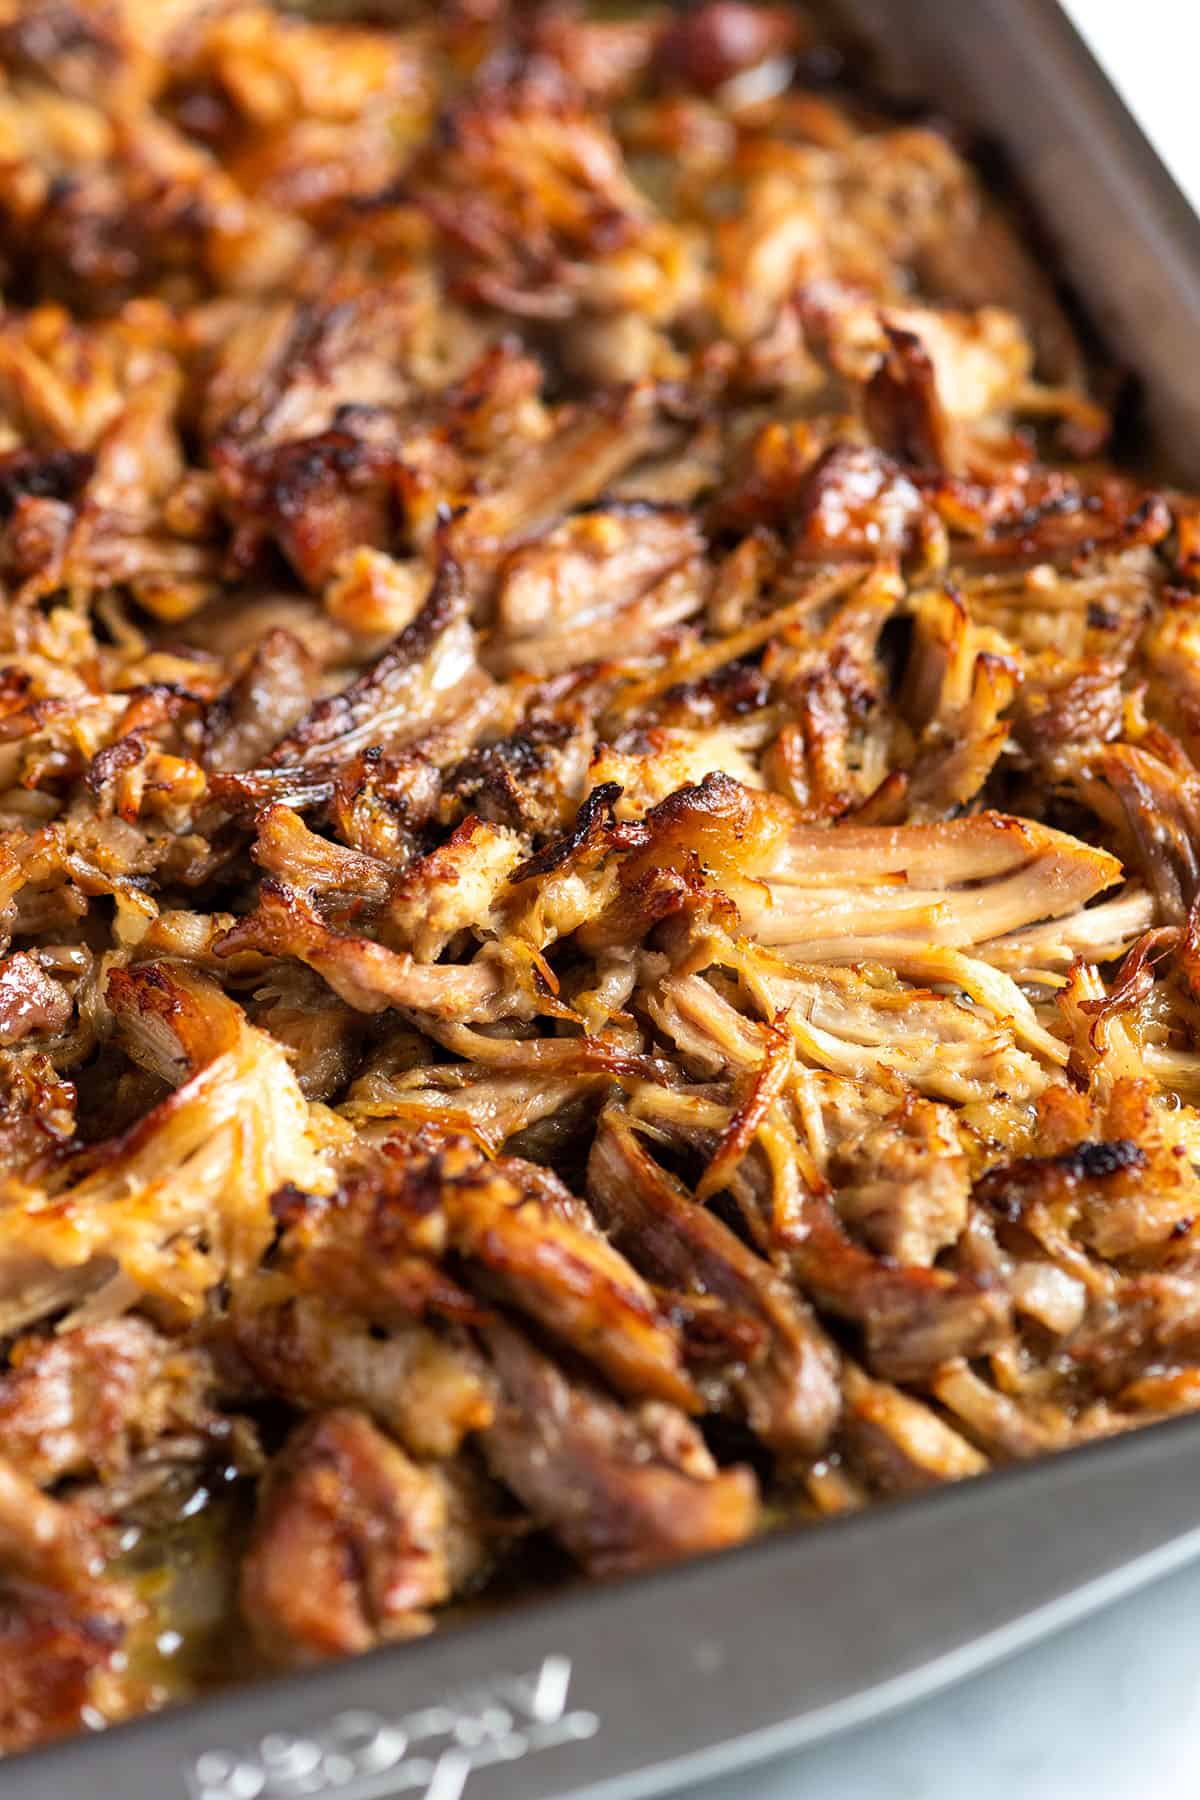 Crispy Carnitas inspired by authentic Mexican carnitas